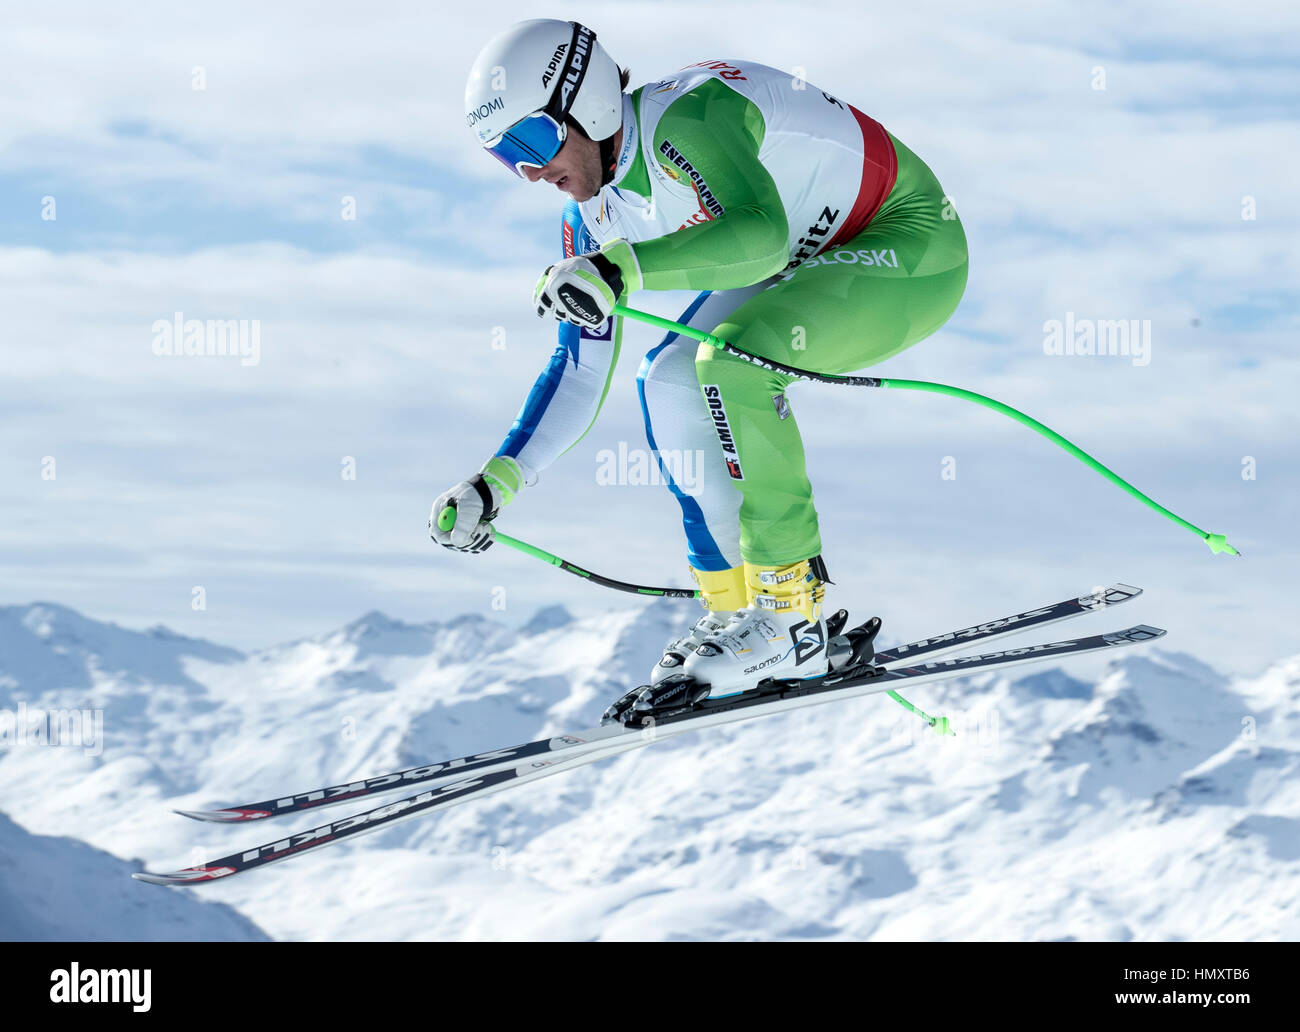 St. Moritz, Switzerland. 7th Feb, 2017. Rok Perko from Slovenia during a training session for the men's race at the Alpine Skiing World Cup in St. Moritz, Switzerland, 7 February 2017. Photo: Michael Kappeler/dpa/Alamy Live News Stock Photo